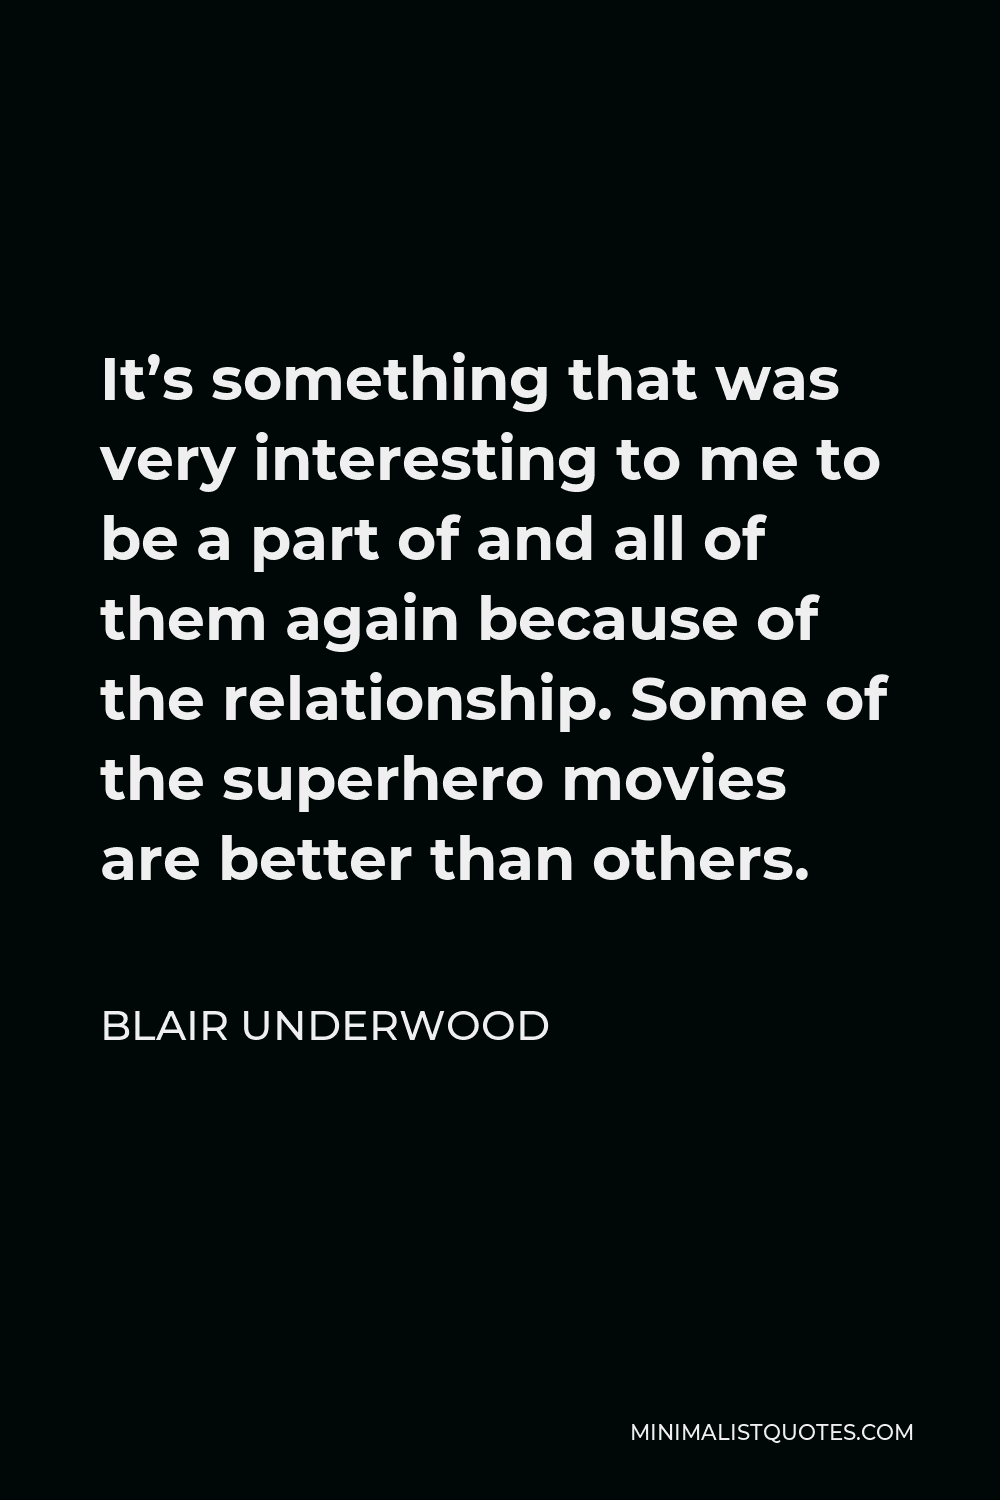 Blair Underwood Quote - It’s something that was very interesting to me to be a part of and all of them again because of the relationship. Some of the superhero movies are better than others.